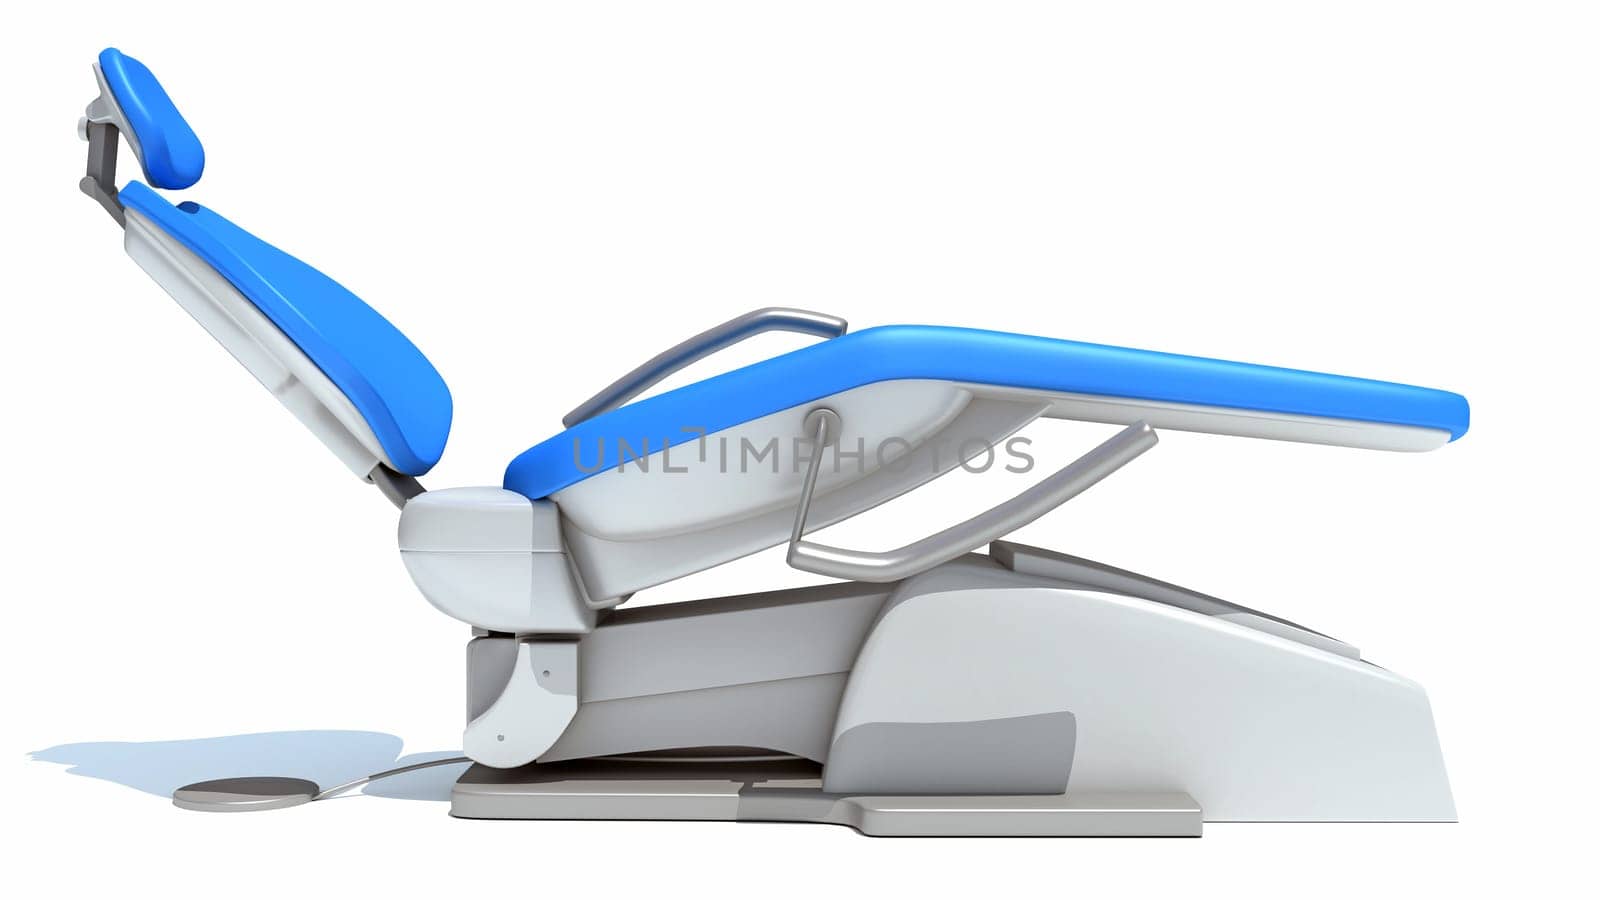 Dental treatment chair 3D rendering on white background by 3DHorse